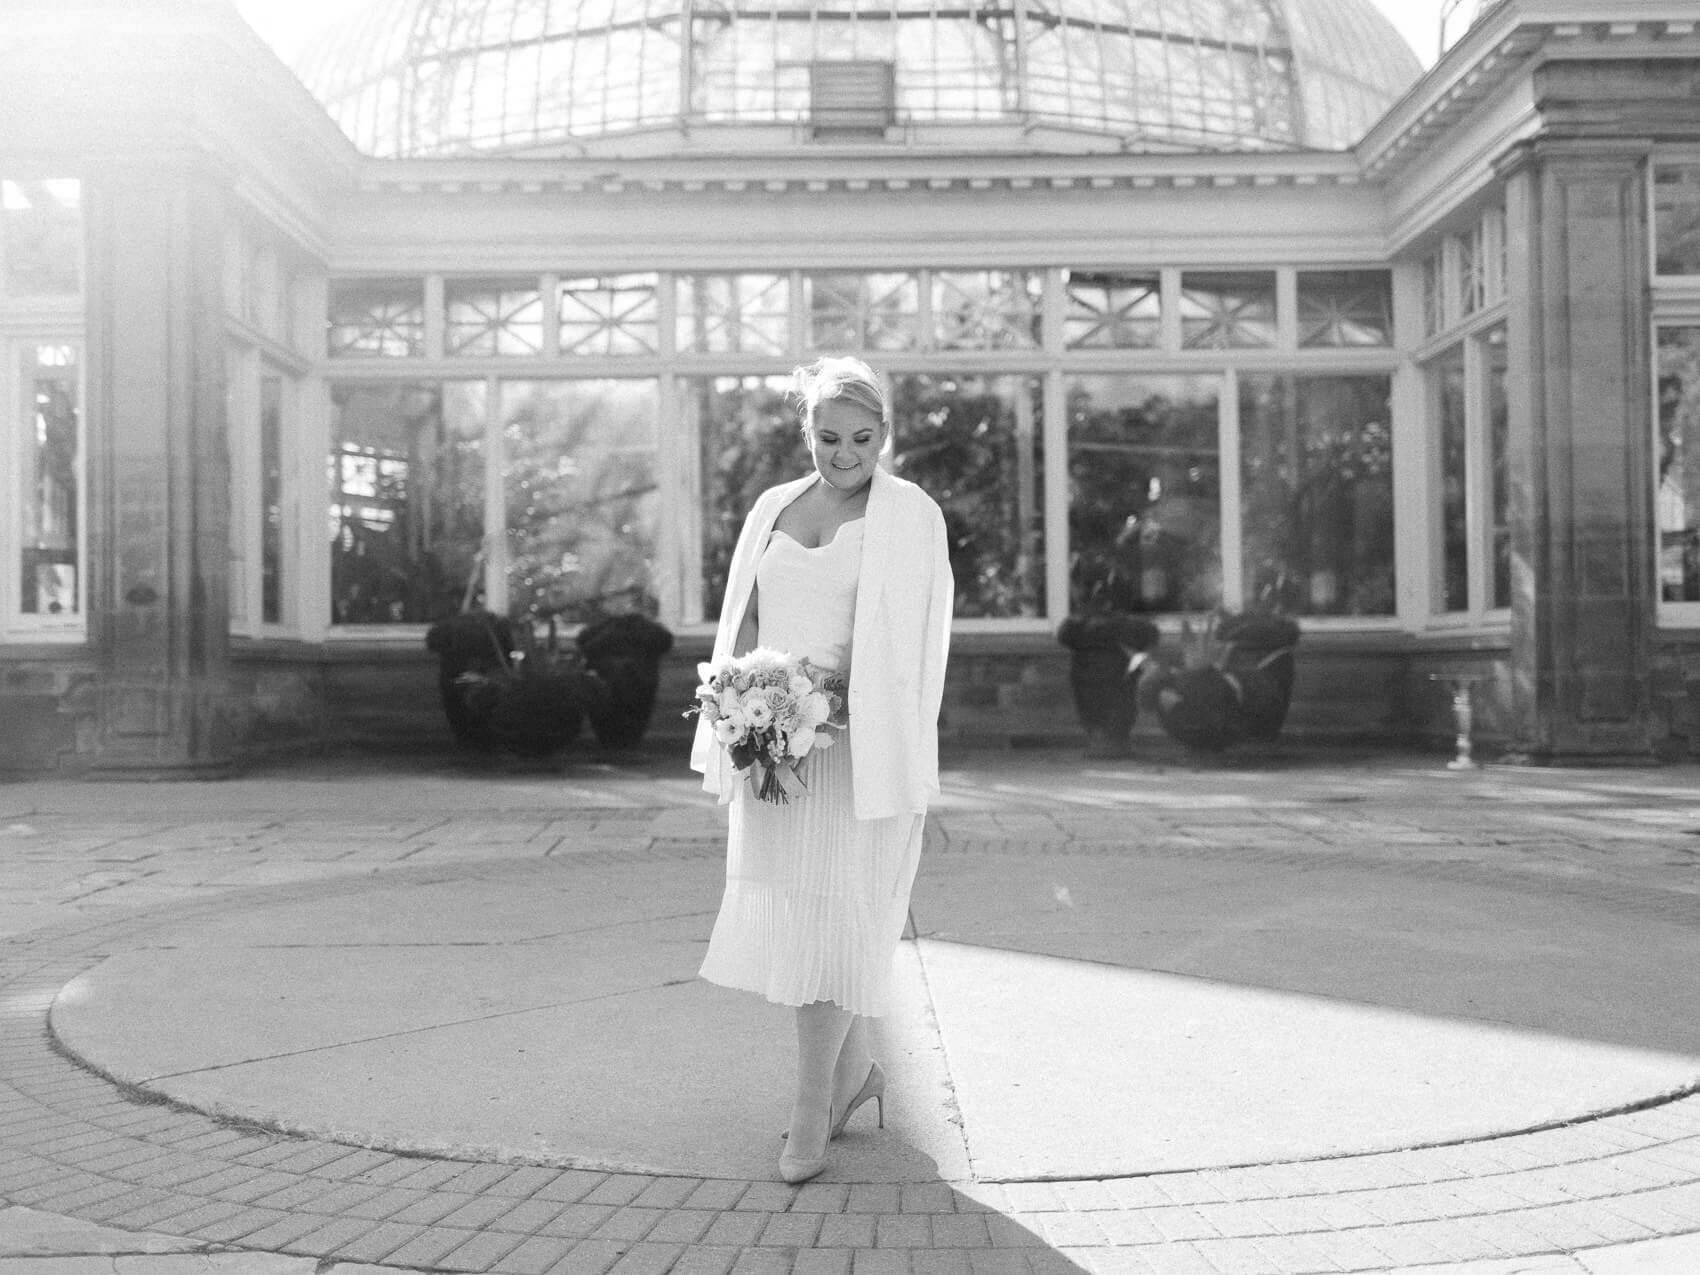 bride posing naturally for candid wedding photographs at her intimate allen gardens elopement